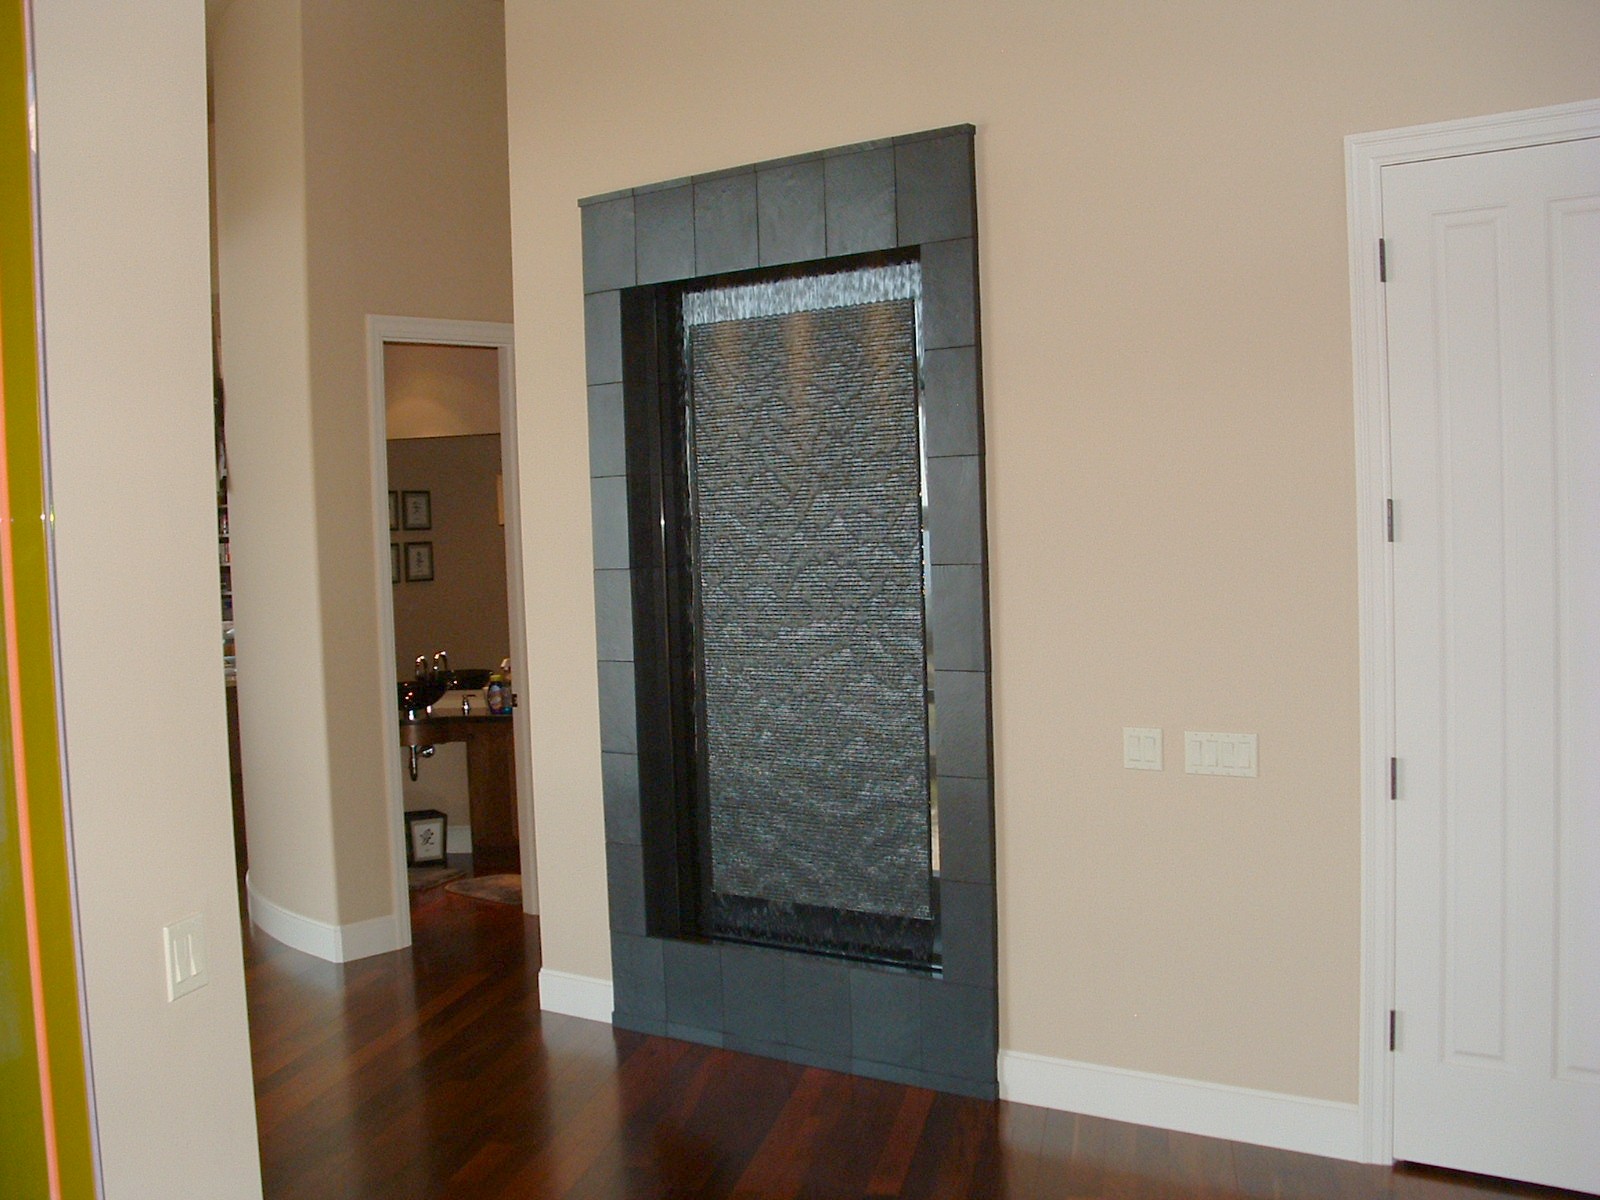 Issaquah WA. residence. 6 ft x 9 ft tall. Black granite wave wall back drop with polished perimeter black slate framework, lighting in valance existing home